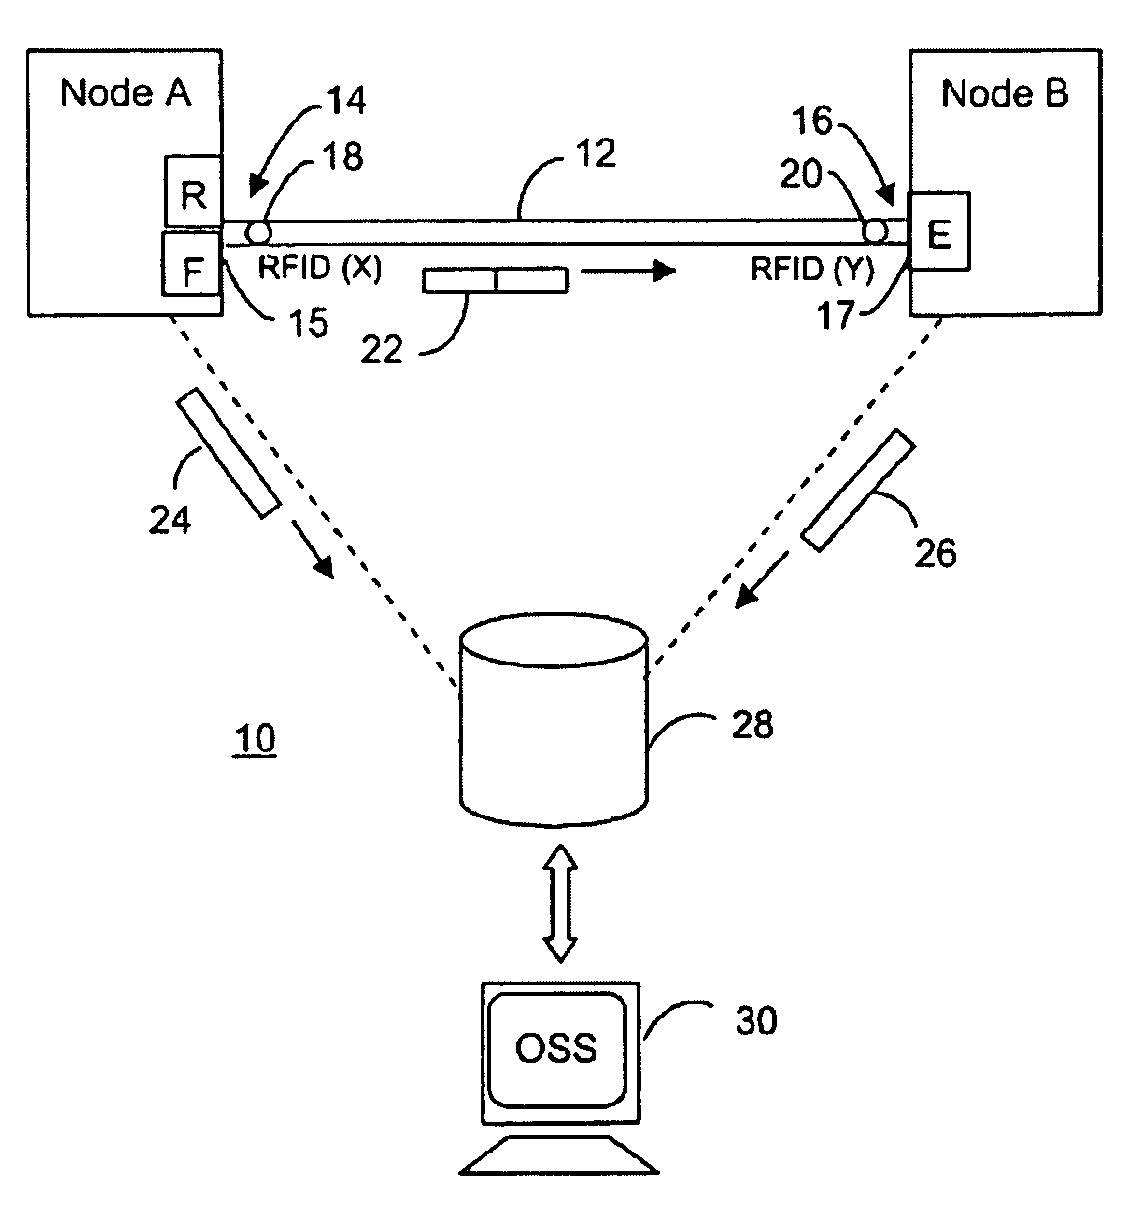 Determining endpoint connectivity of cabling interconnects